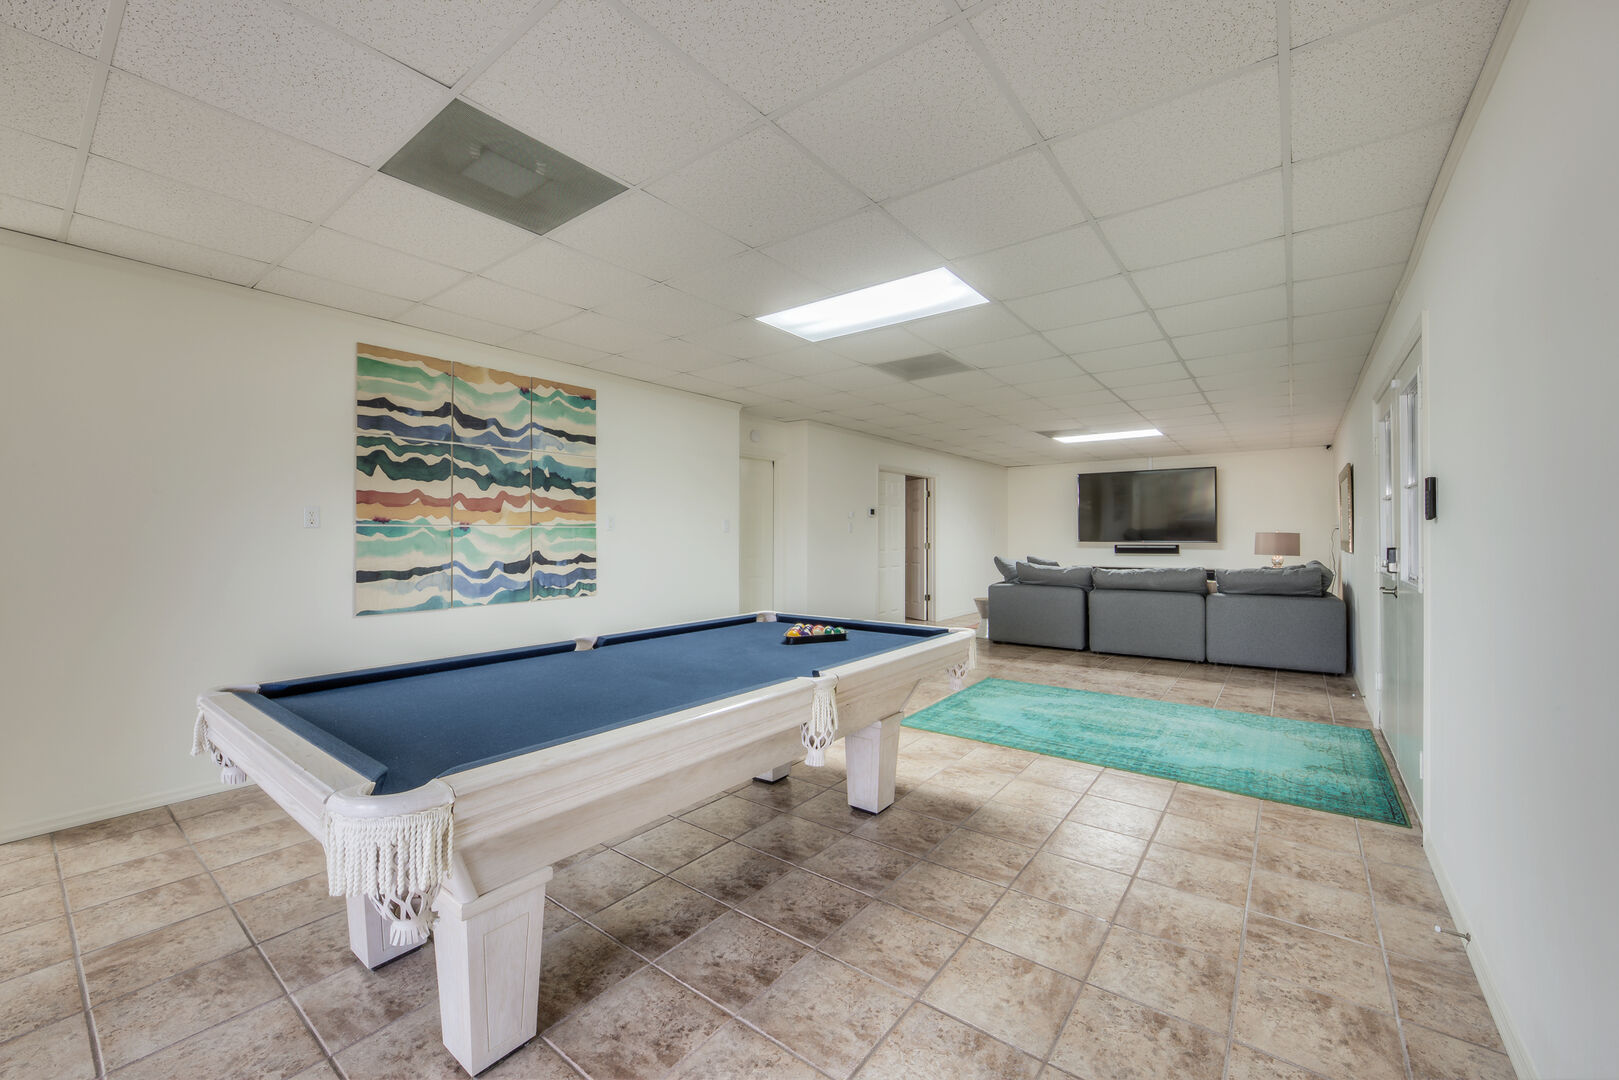 5 Bedroom Game Room Vacation Rentals Near Fort Myers FL ...